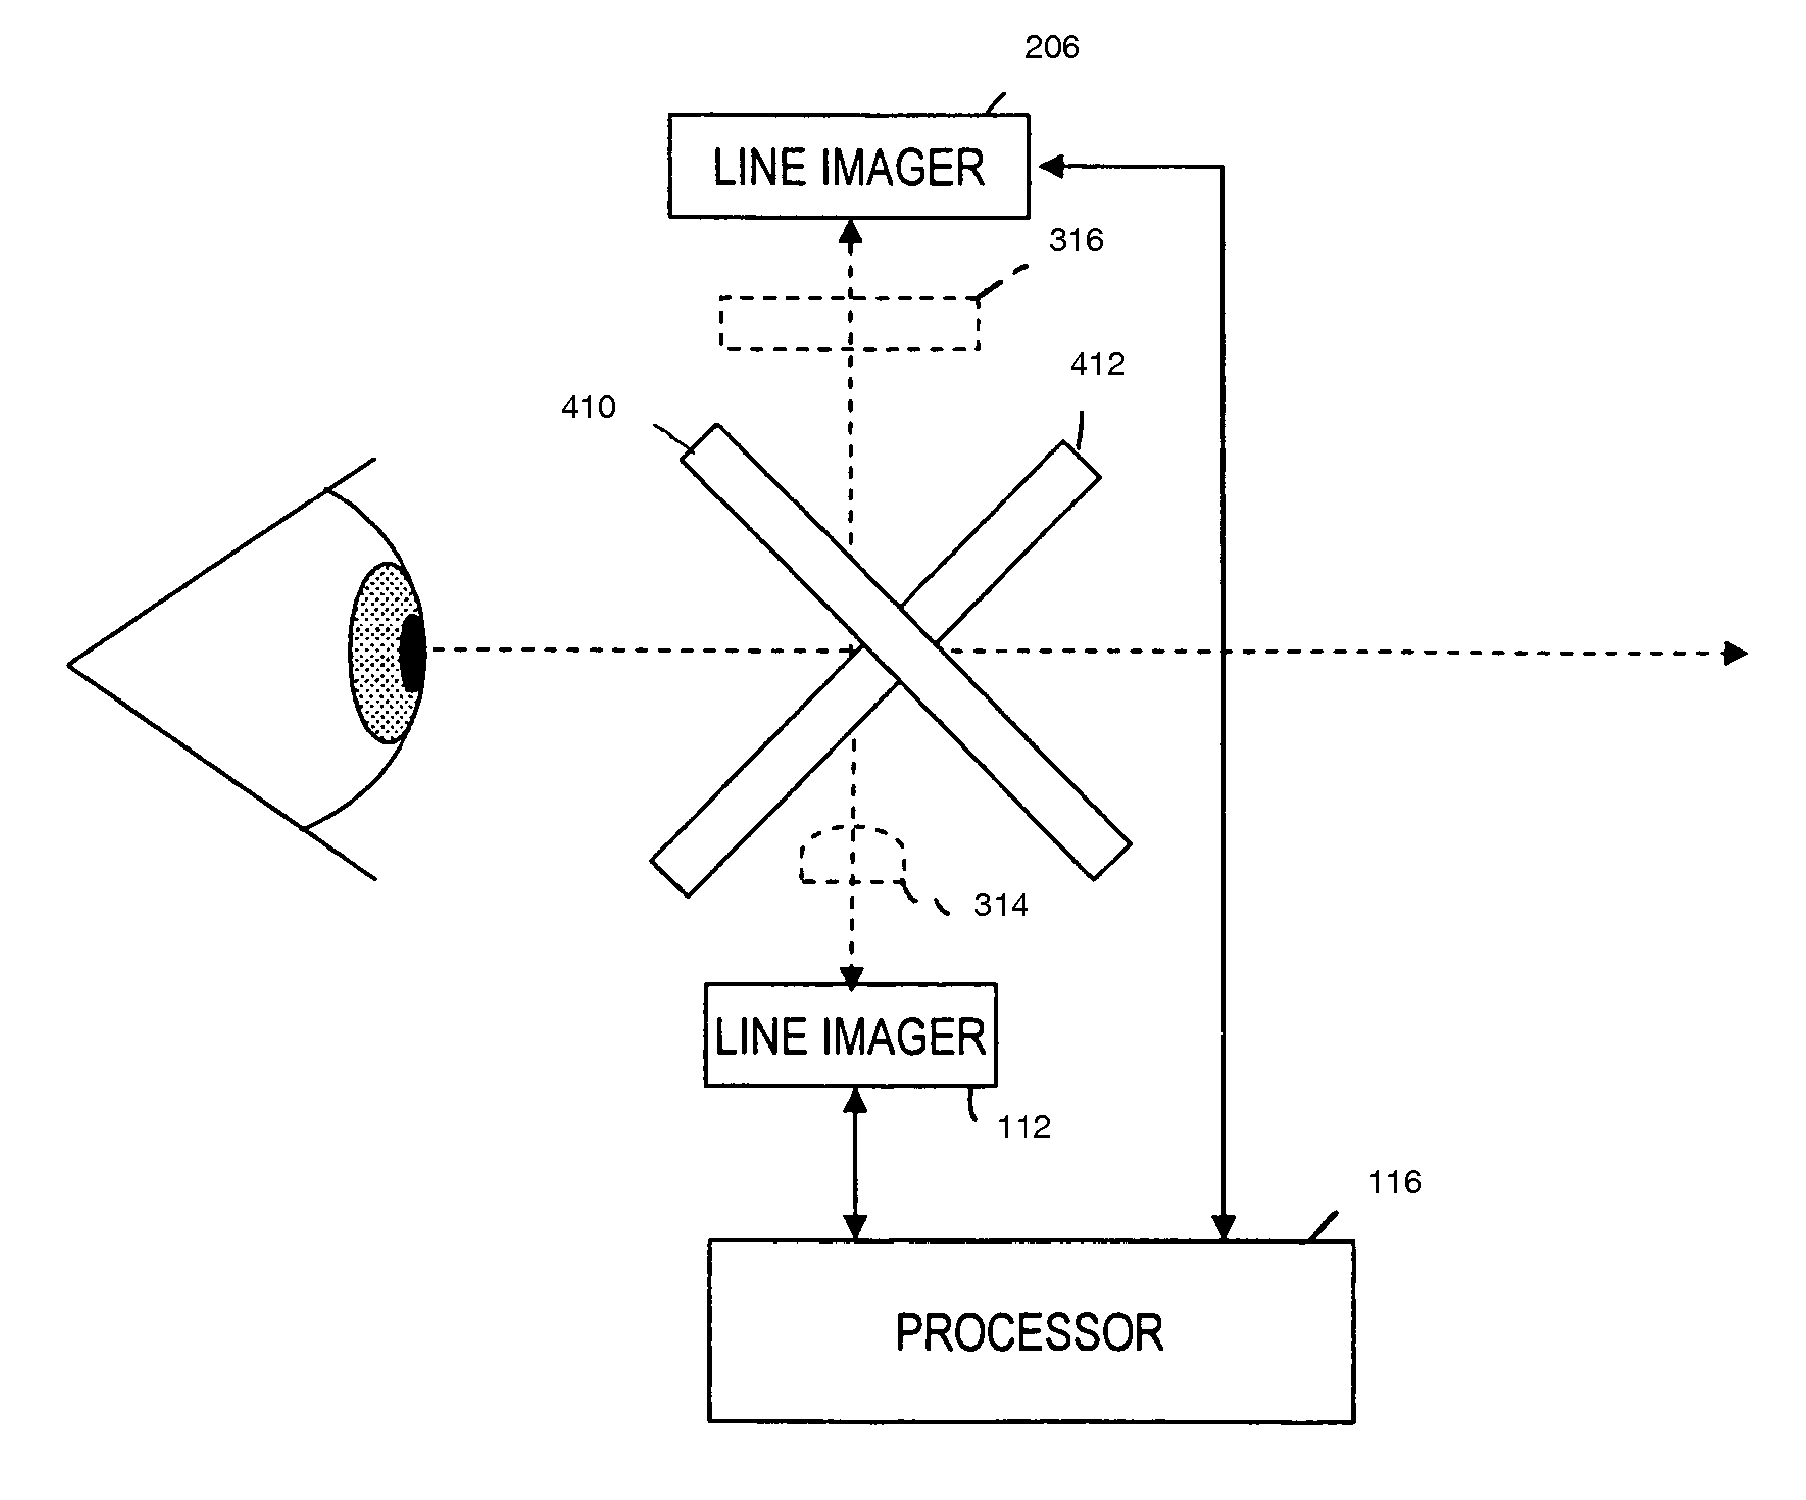 Apparatus to detect and measure saccade and pupilary changes